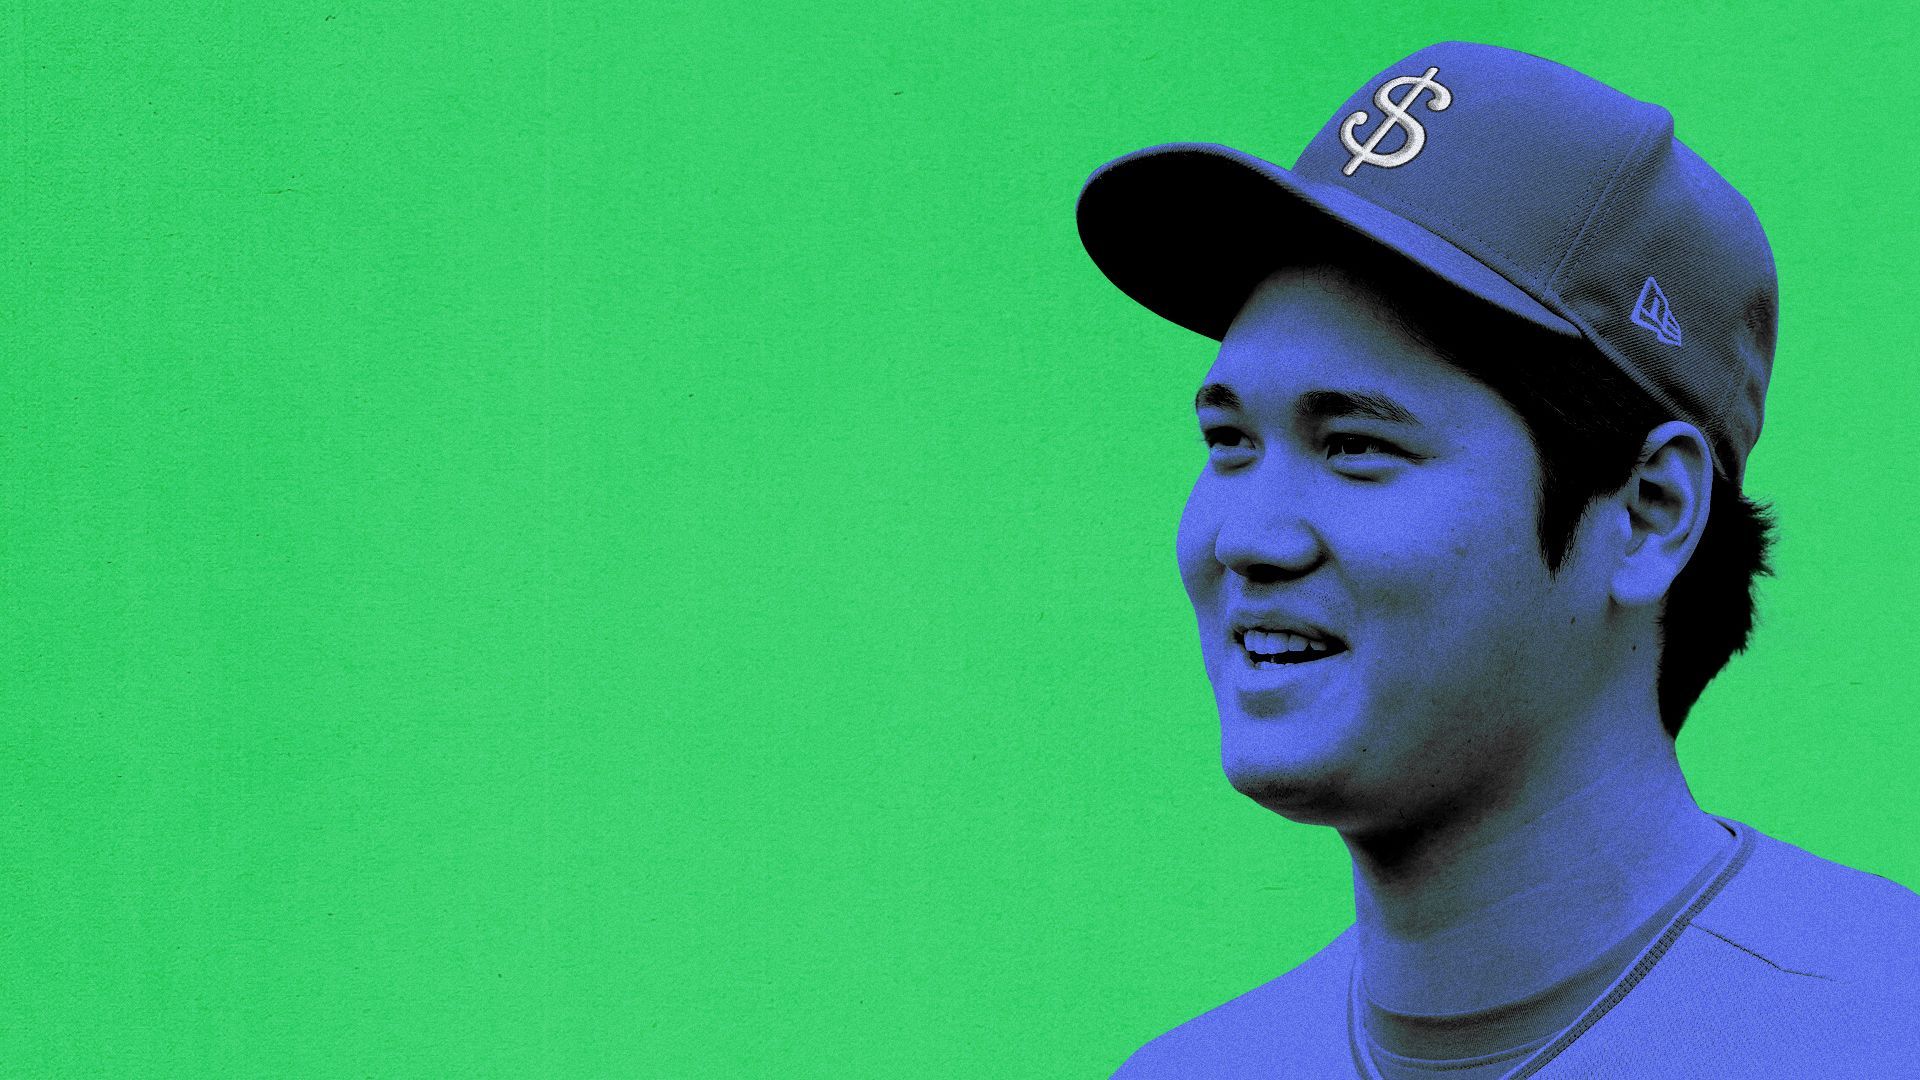 Photo illustration of Shohei Ohtani with a dollar sign on his baseball cap.